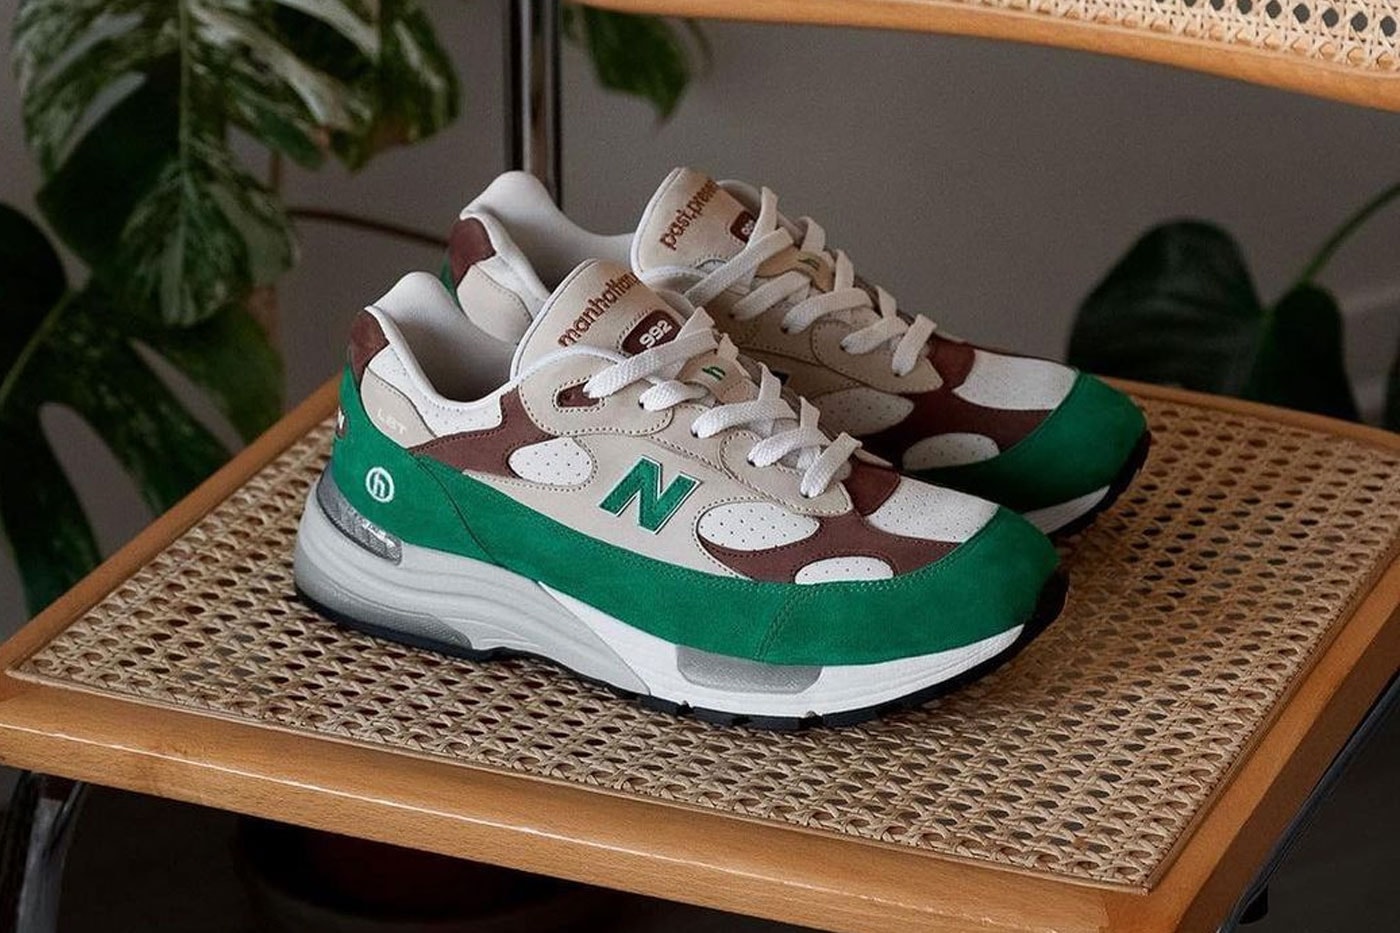 Hidden NY New Balance 992 green brown white gray past present future H LST first look release info date price